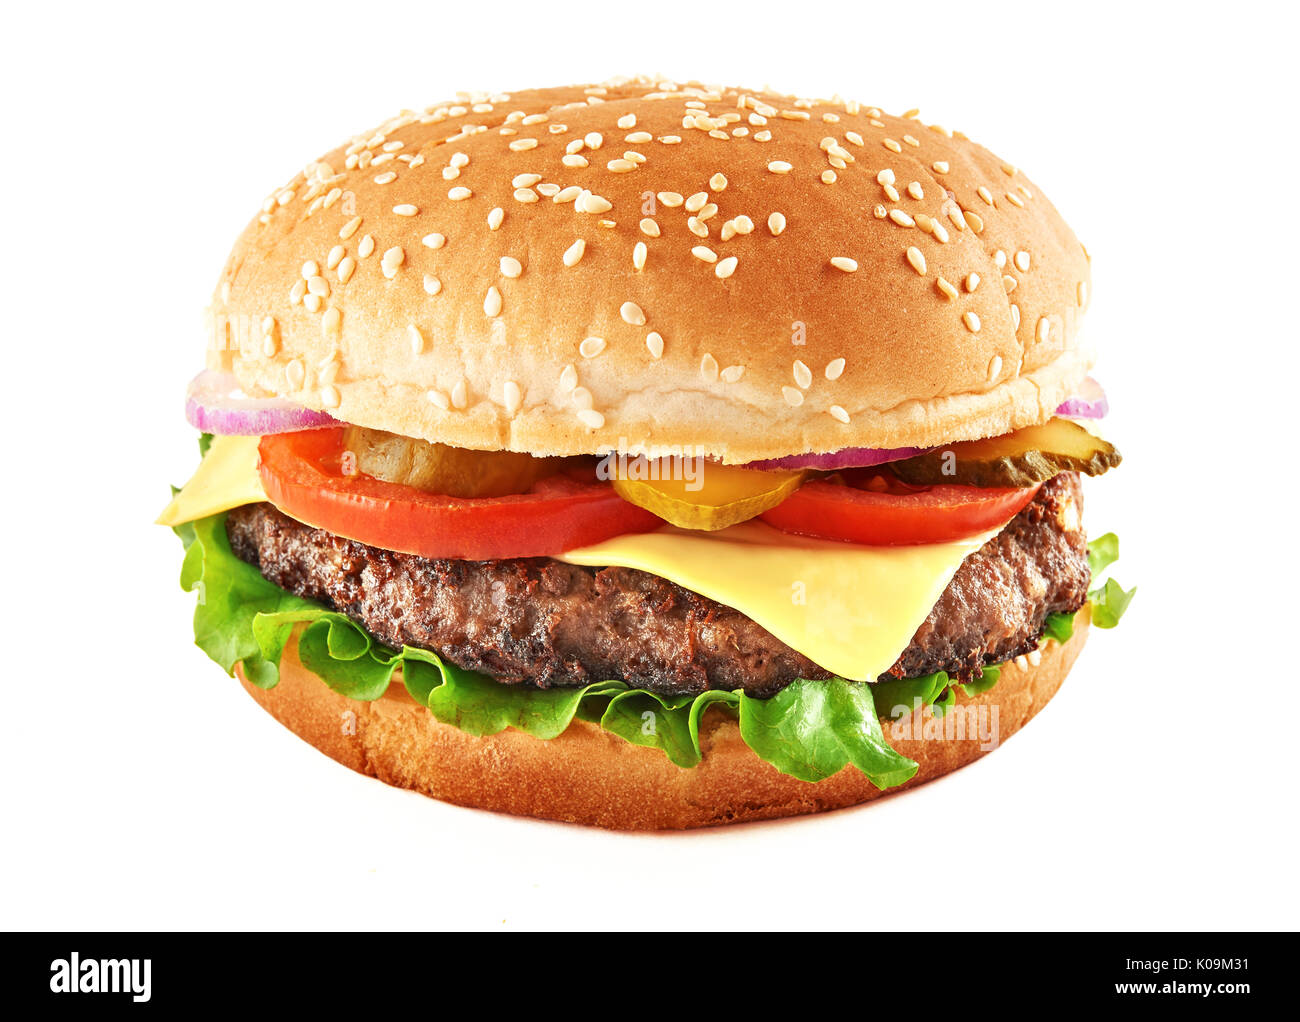 Classic cheeseburger isolated on white background. Front view. Stock Photo